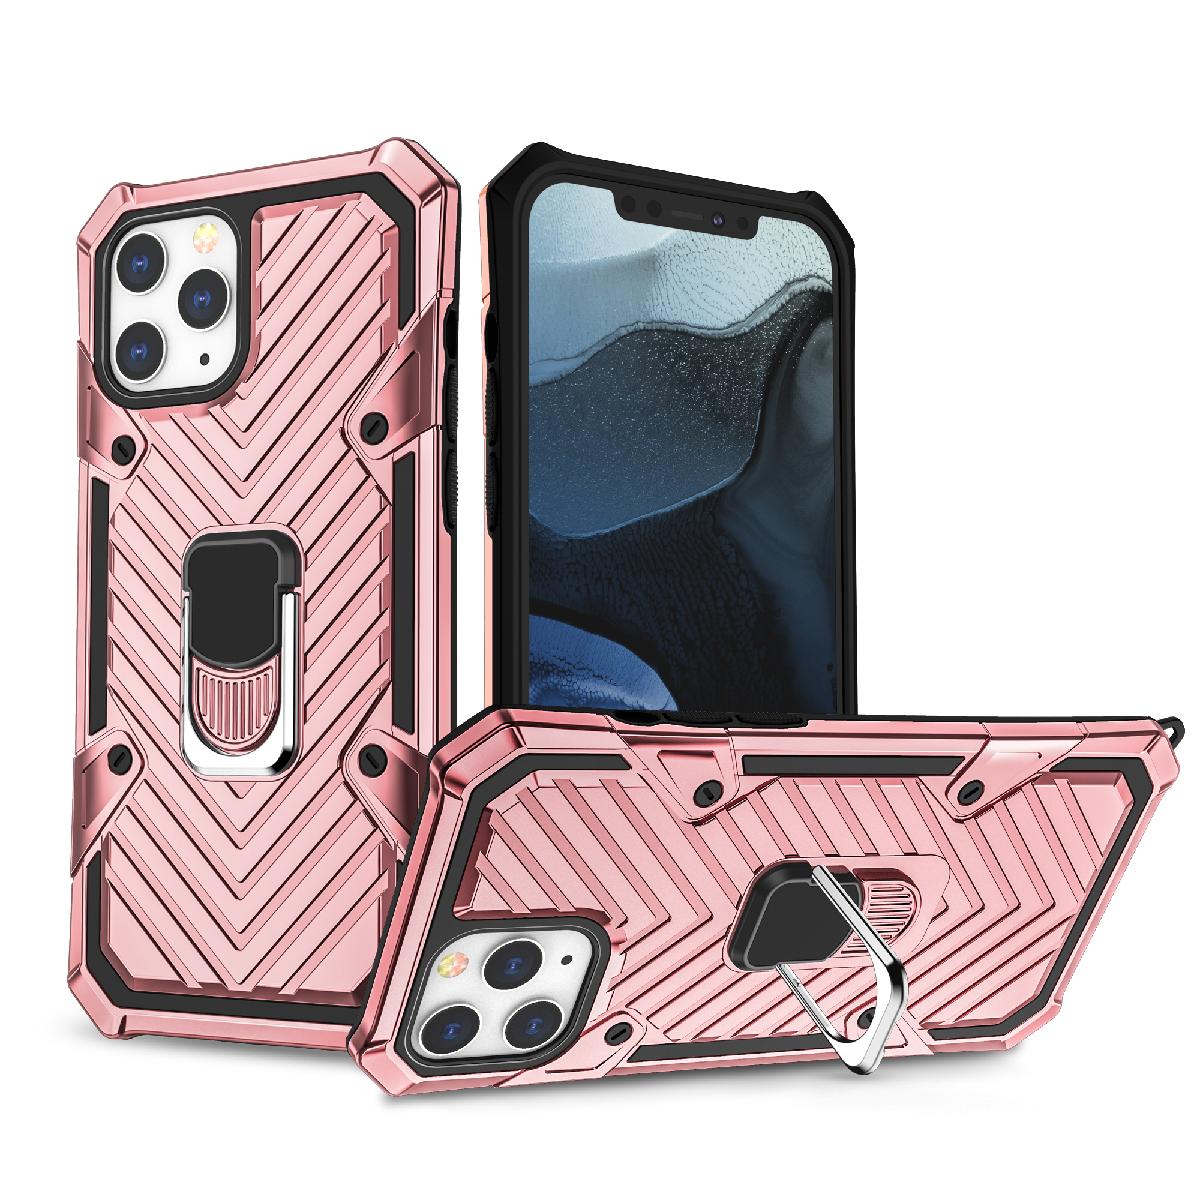 IPHONE 12/ IPHONE 12 PRO Kickstand Anti-Shock And Anti Falling Case In Rose Gold